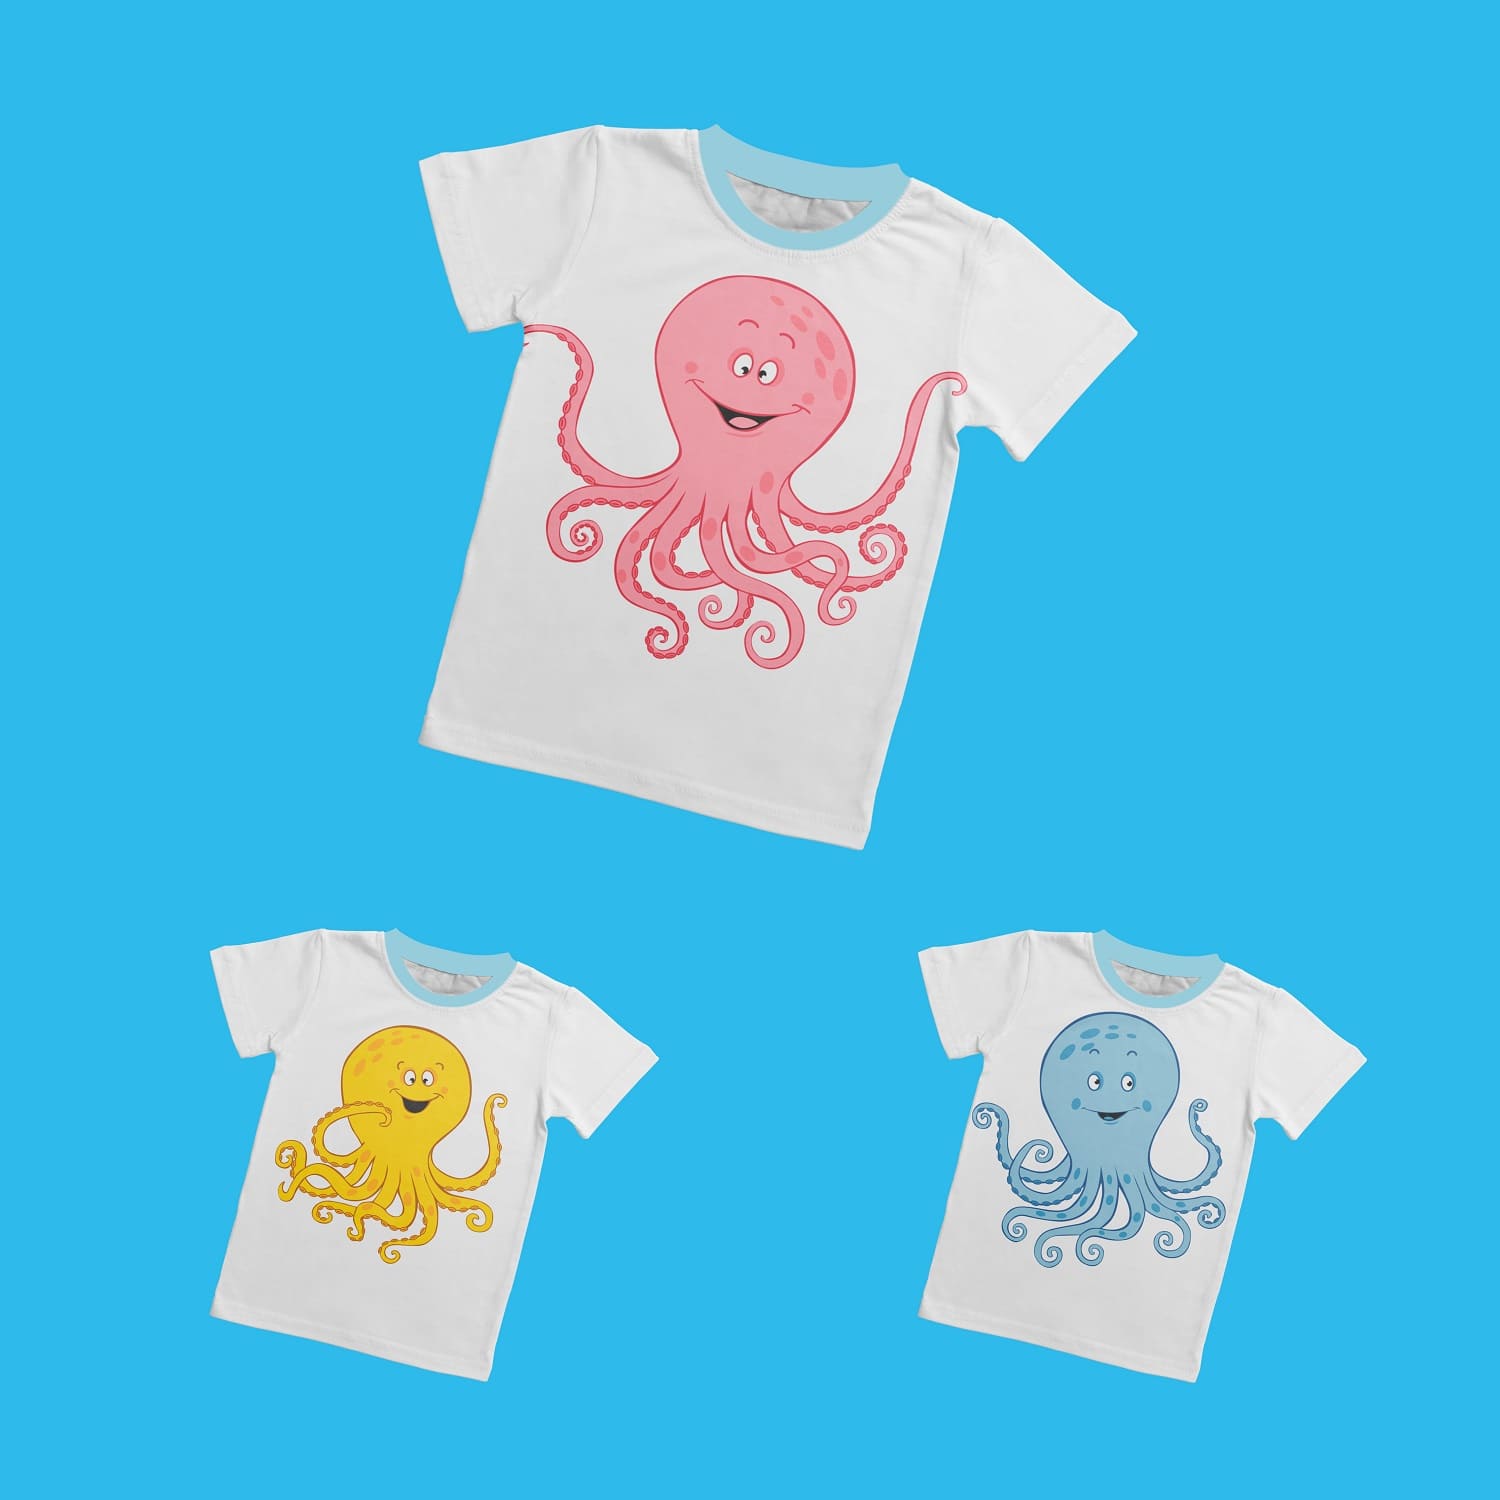 A set of three funny octopus t-shirt designs on a blue background.